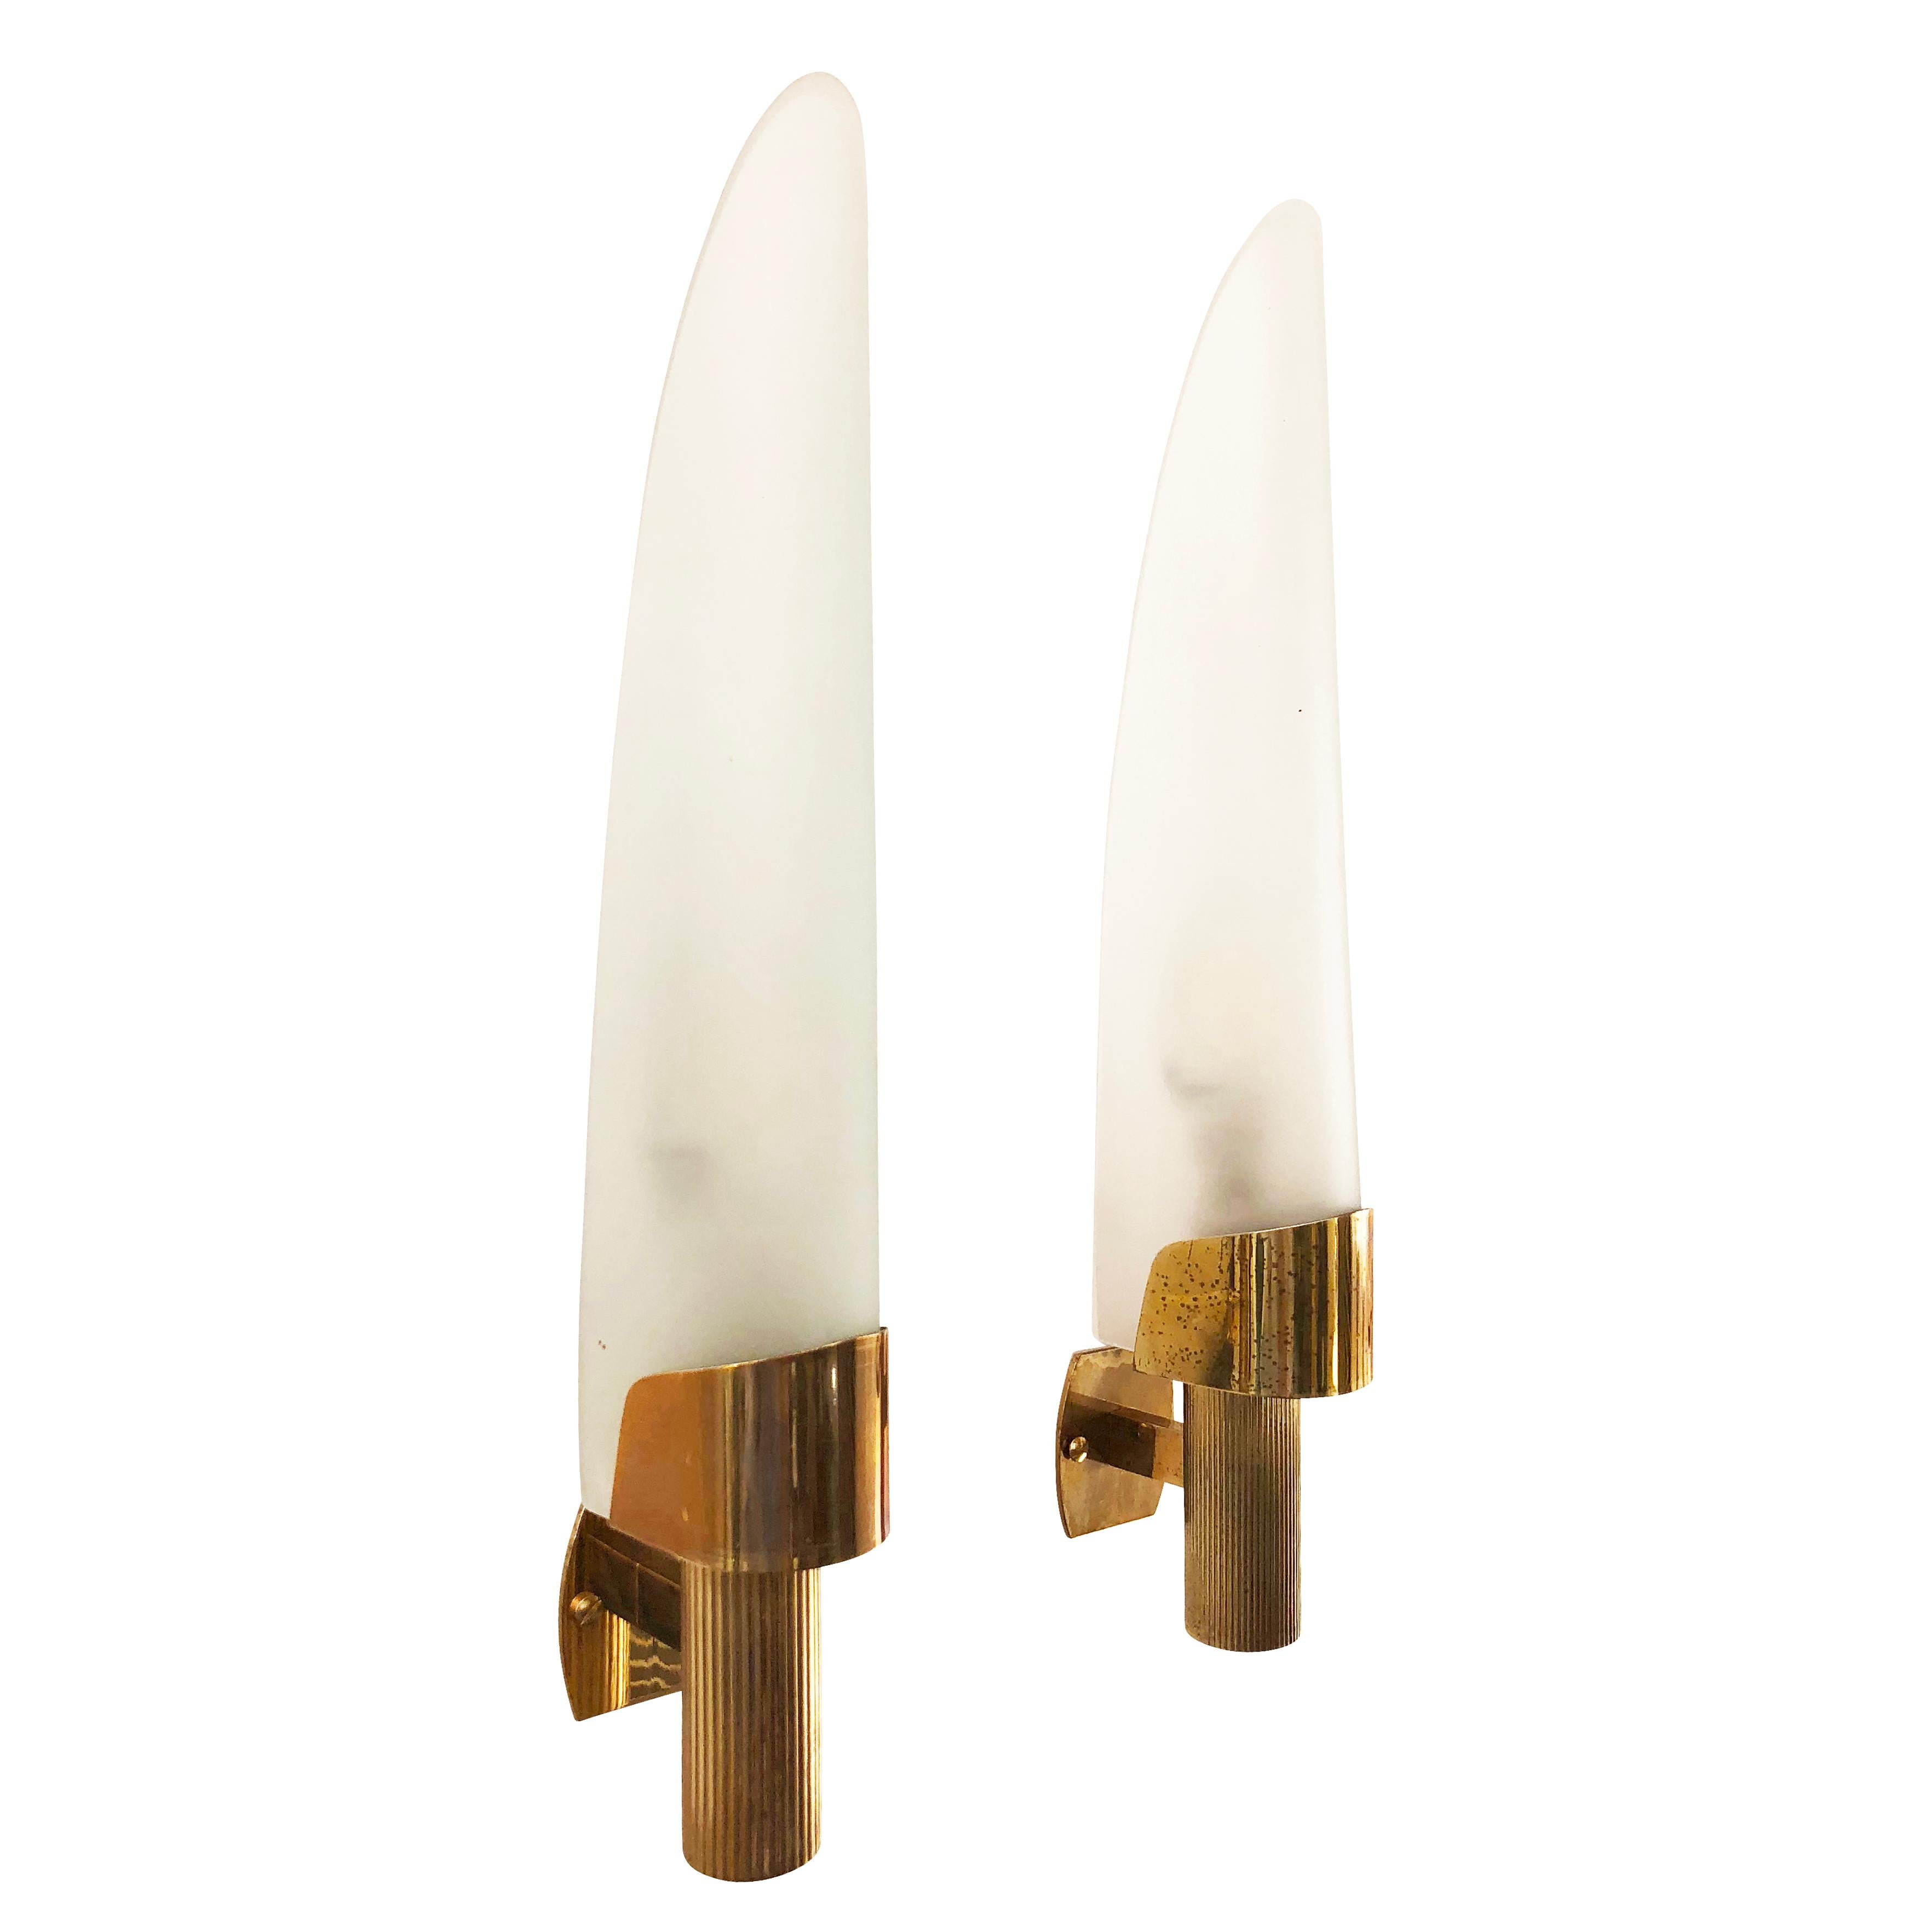 Pair of narrow sconces made by Fontana Arte in the 1960s. Each features a frosted glass on a brass frame. They have been left in original condition for authenticity purposes but can be polished on request at no additional cost. There are slight